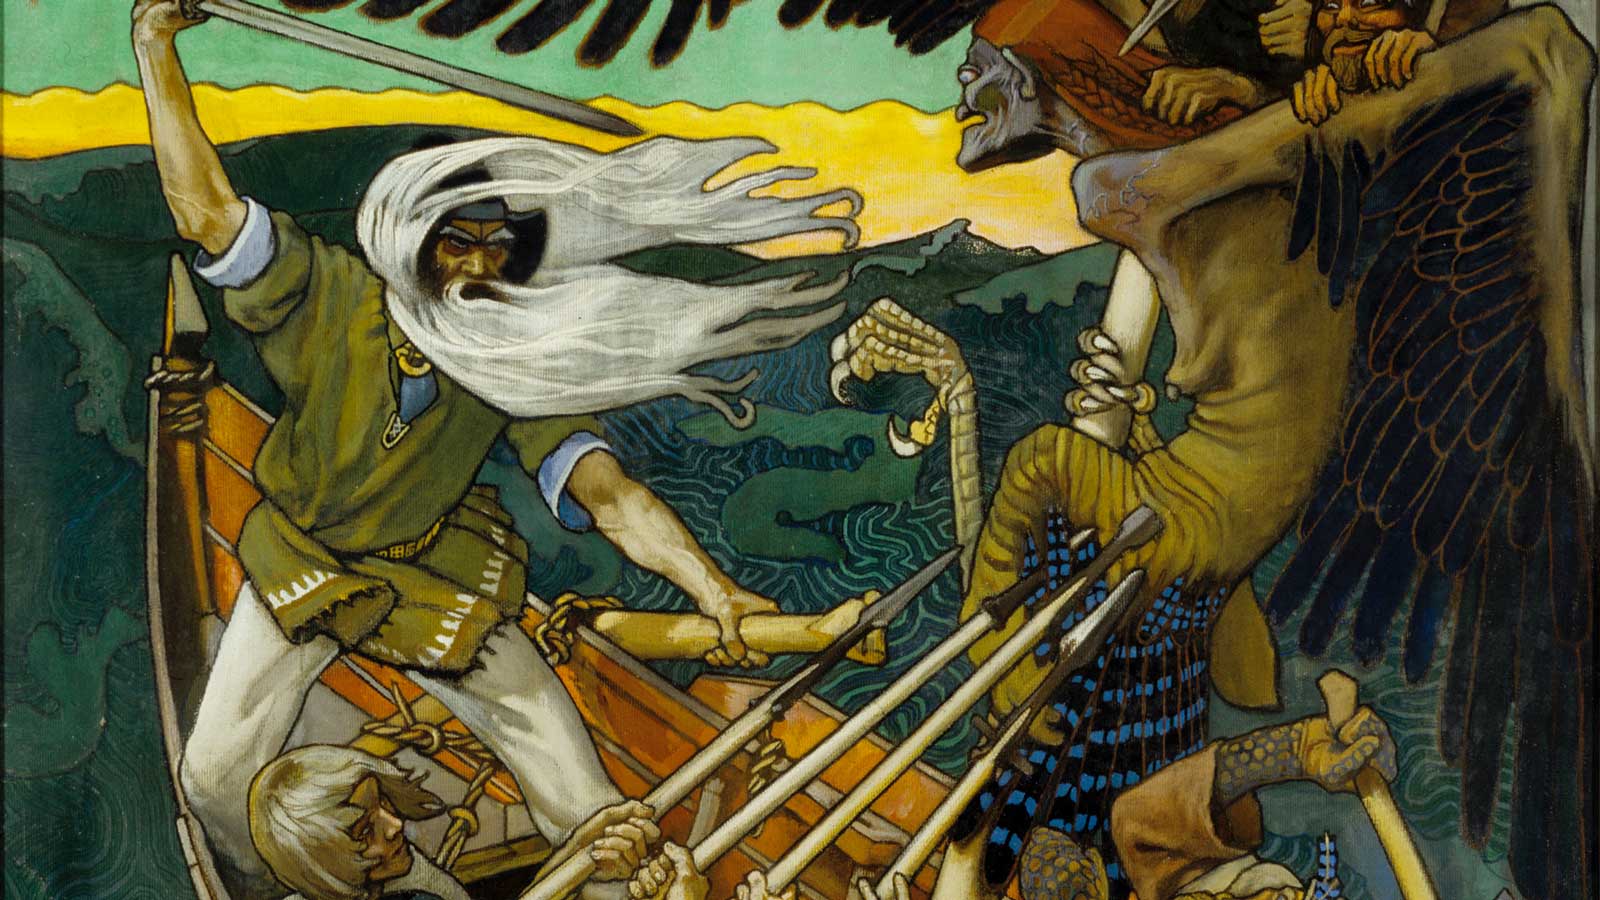 Painting depicting Väinämöinen, standing at the helm of a boat with white flowing hair raising a sword to the evil witch Louhi